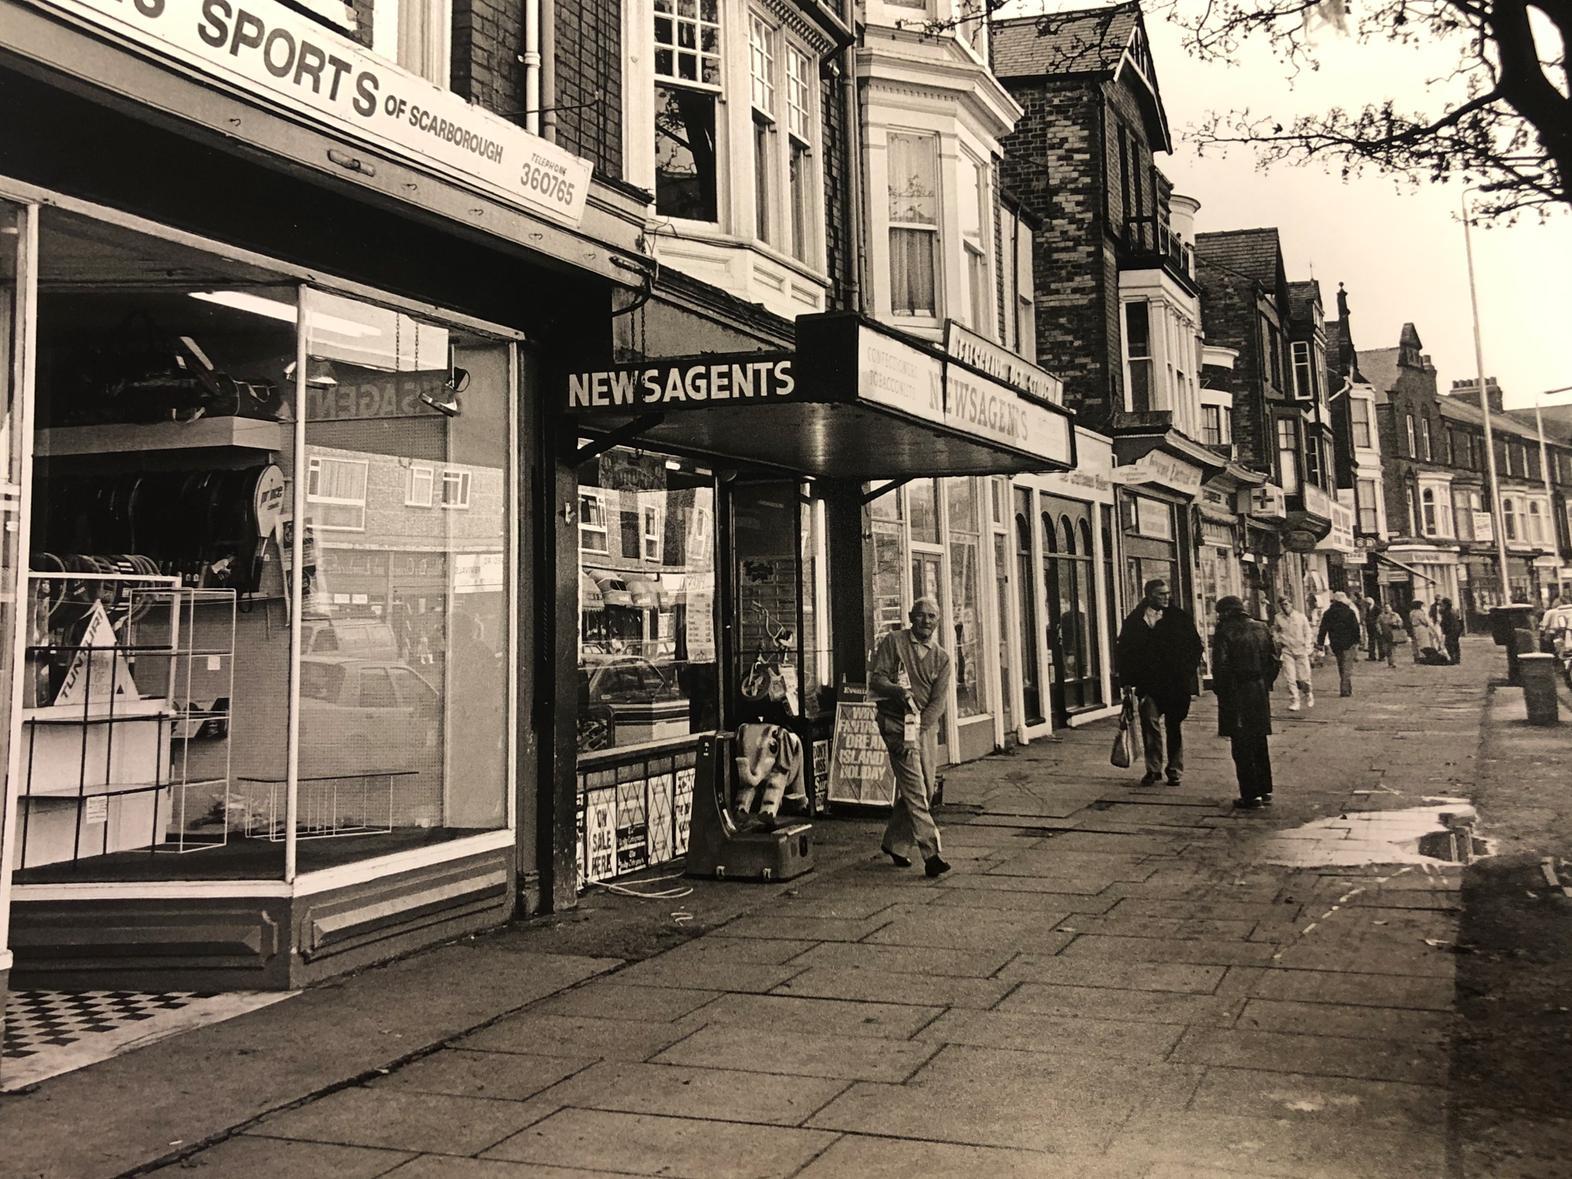 In this photo from 1989 a gentleman can be seen picking his paper up from the newsagents. Today he would be collecting a pizza as the building is now a takeaway. The pet shop next door, however, is still there.